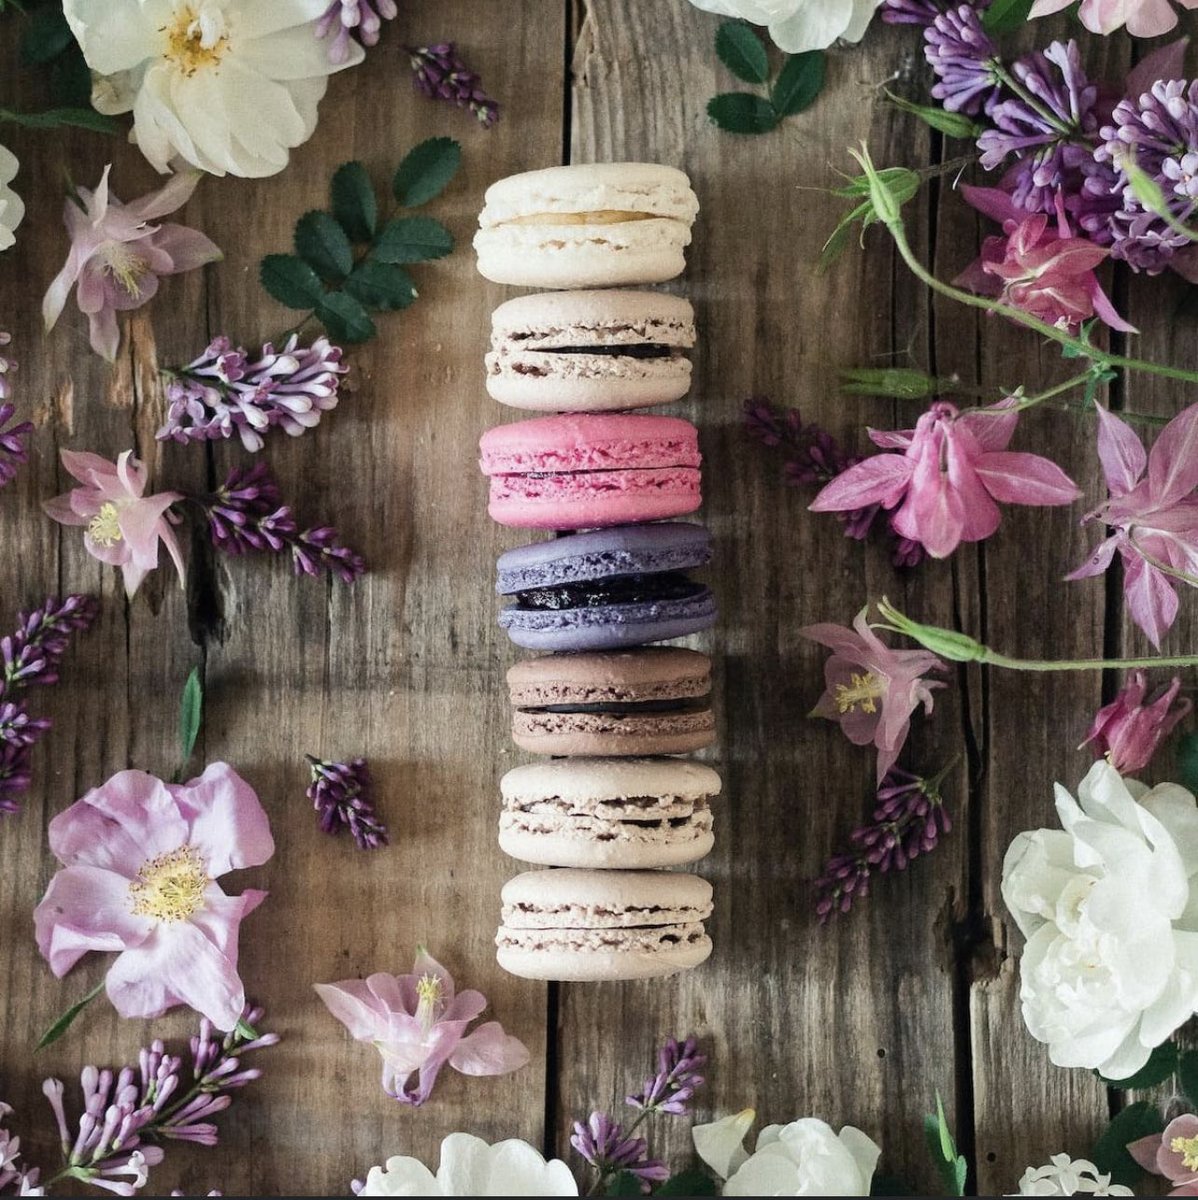 Colorful, Delicious & Soft.
Perfect size treat waiting for you at Adélie! 
#welovemacarons #frenchmacarons #justenoughsweetness #fulloflife #adéliebakerie #splitcroatia #frenchbakery